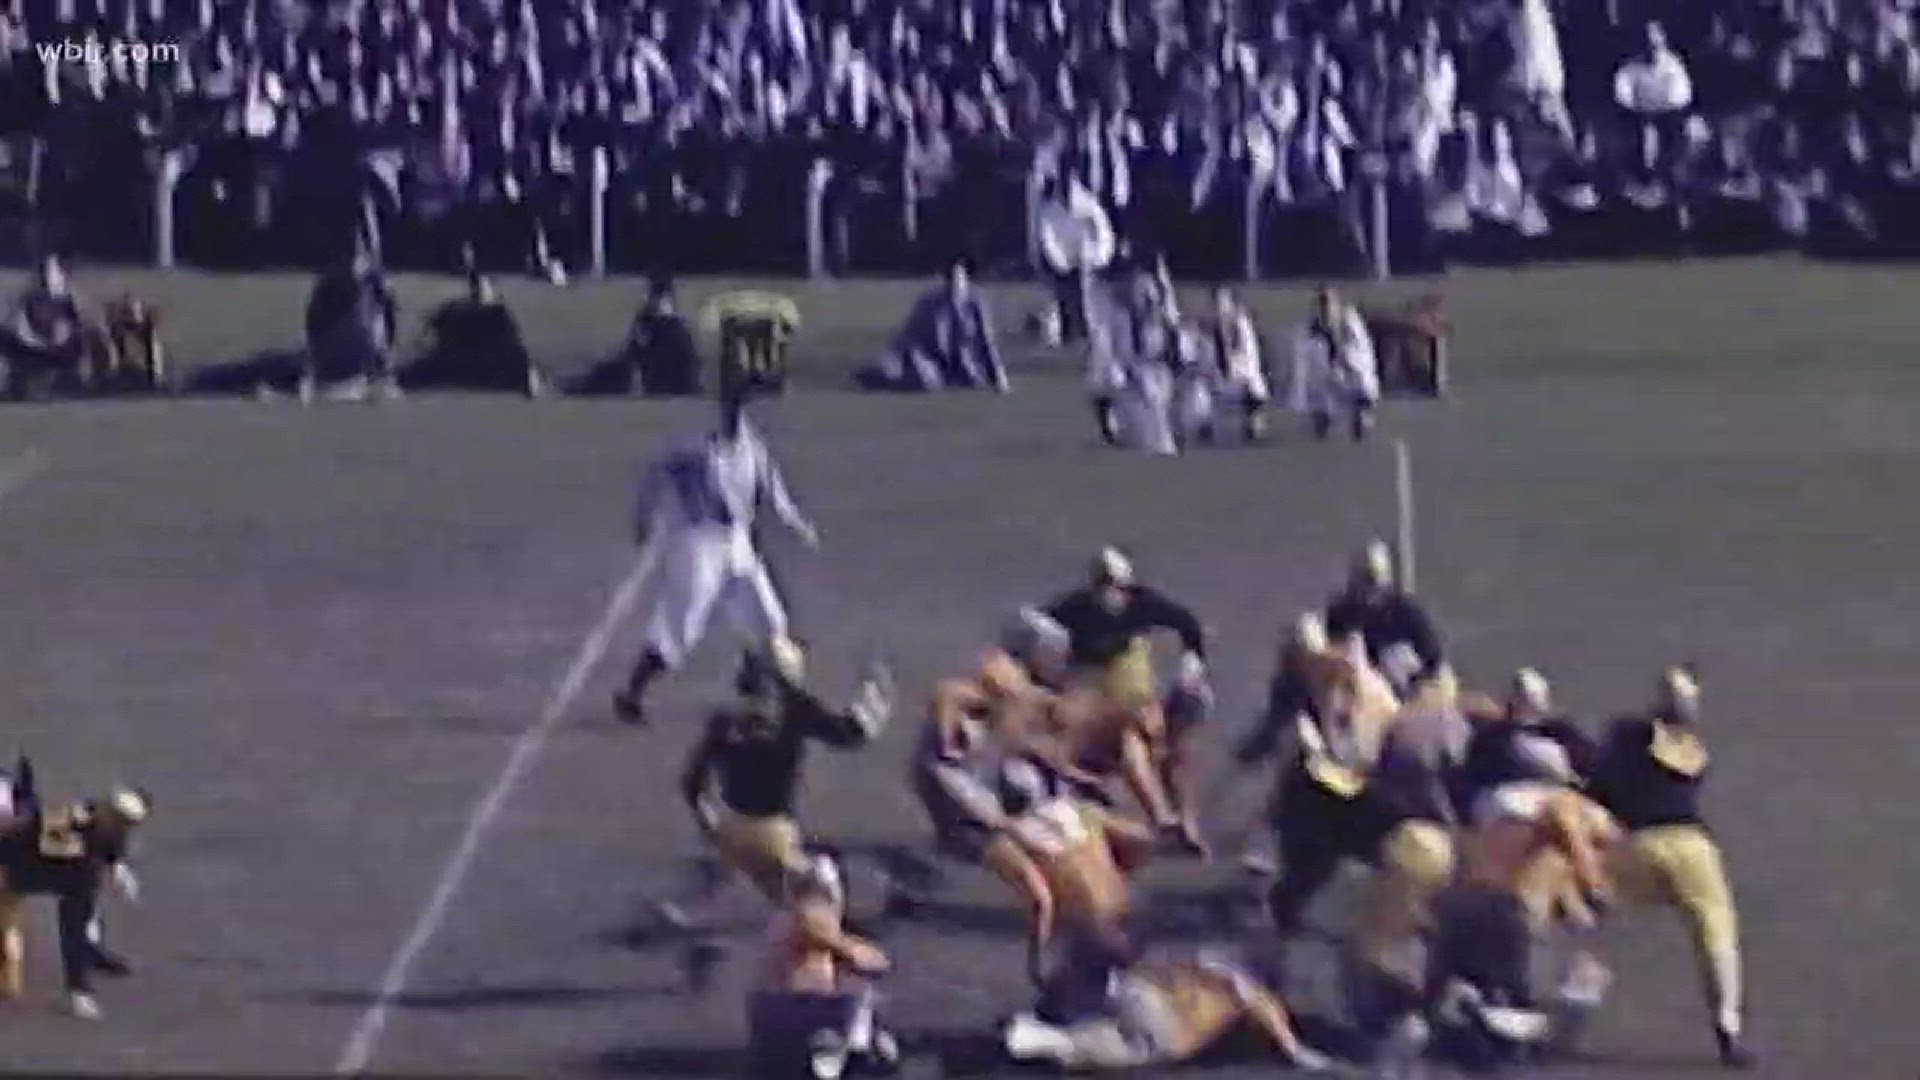 Feb. 5, 2018: Before the days of television, fans were the ones shooting footage of UT football games. A lot of that football history lives in home movies.